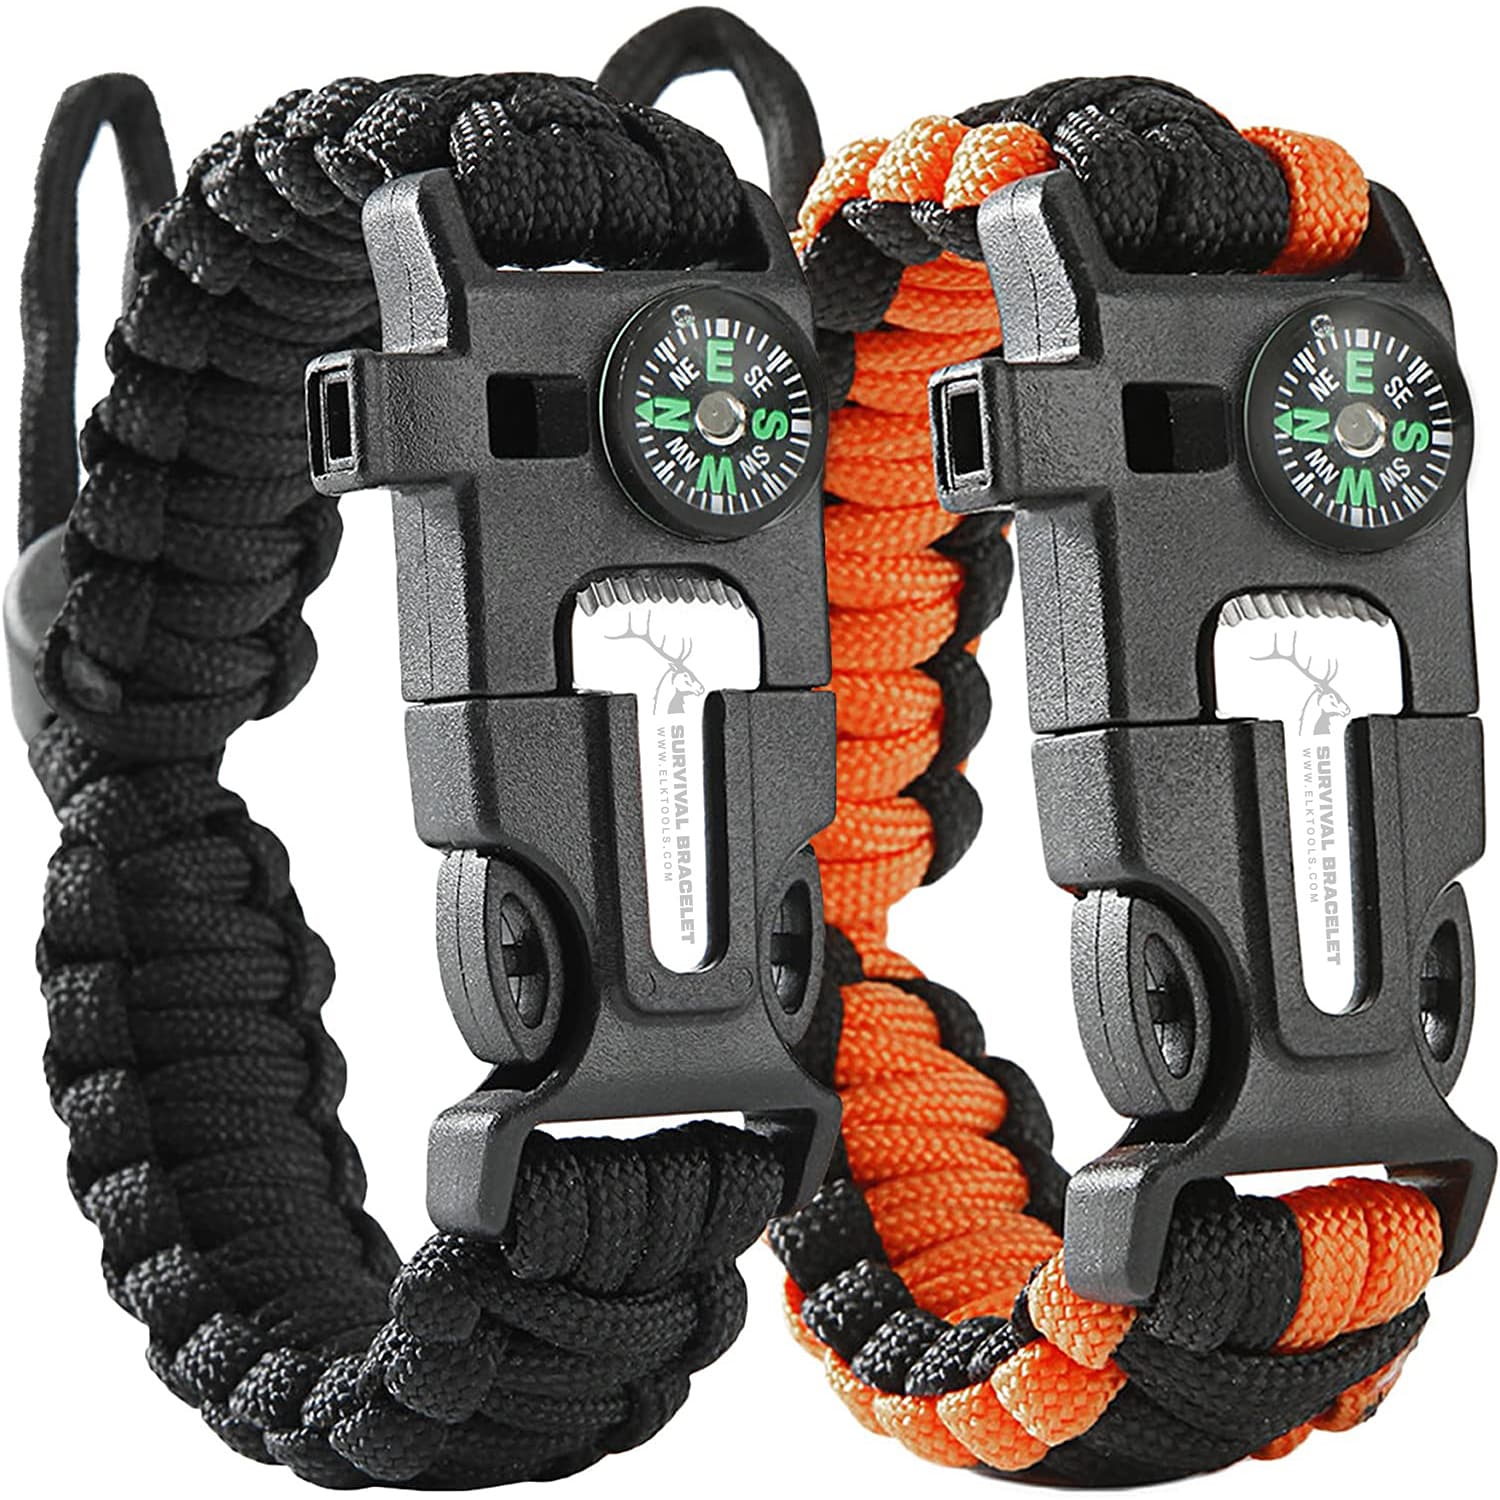 Elk Paracord Survival Bracelets - 2 Pack, Adjustable size, Loud Whistle, Fire Starter - Ideal for Outdoor Enthusiasts, Hiking, Camping, Fishing, and